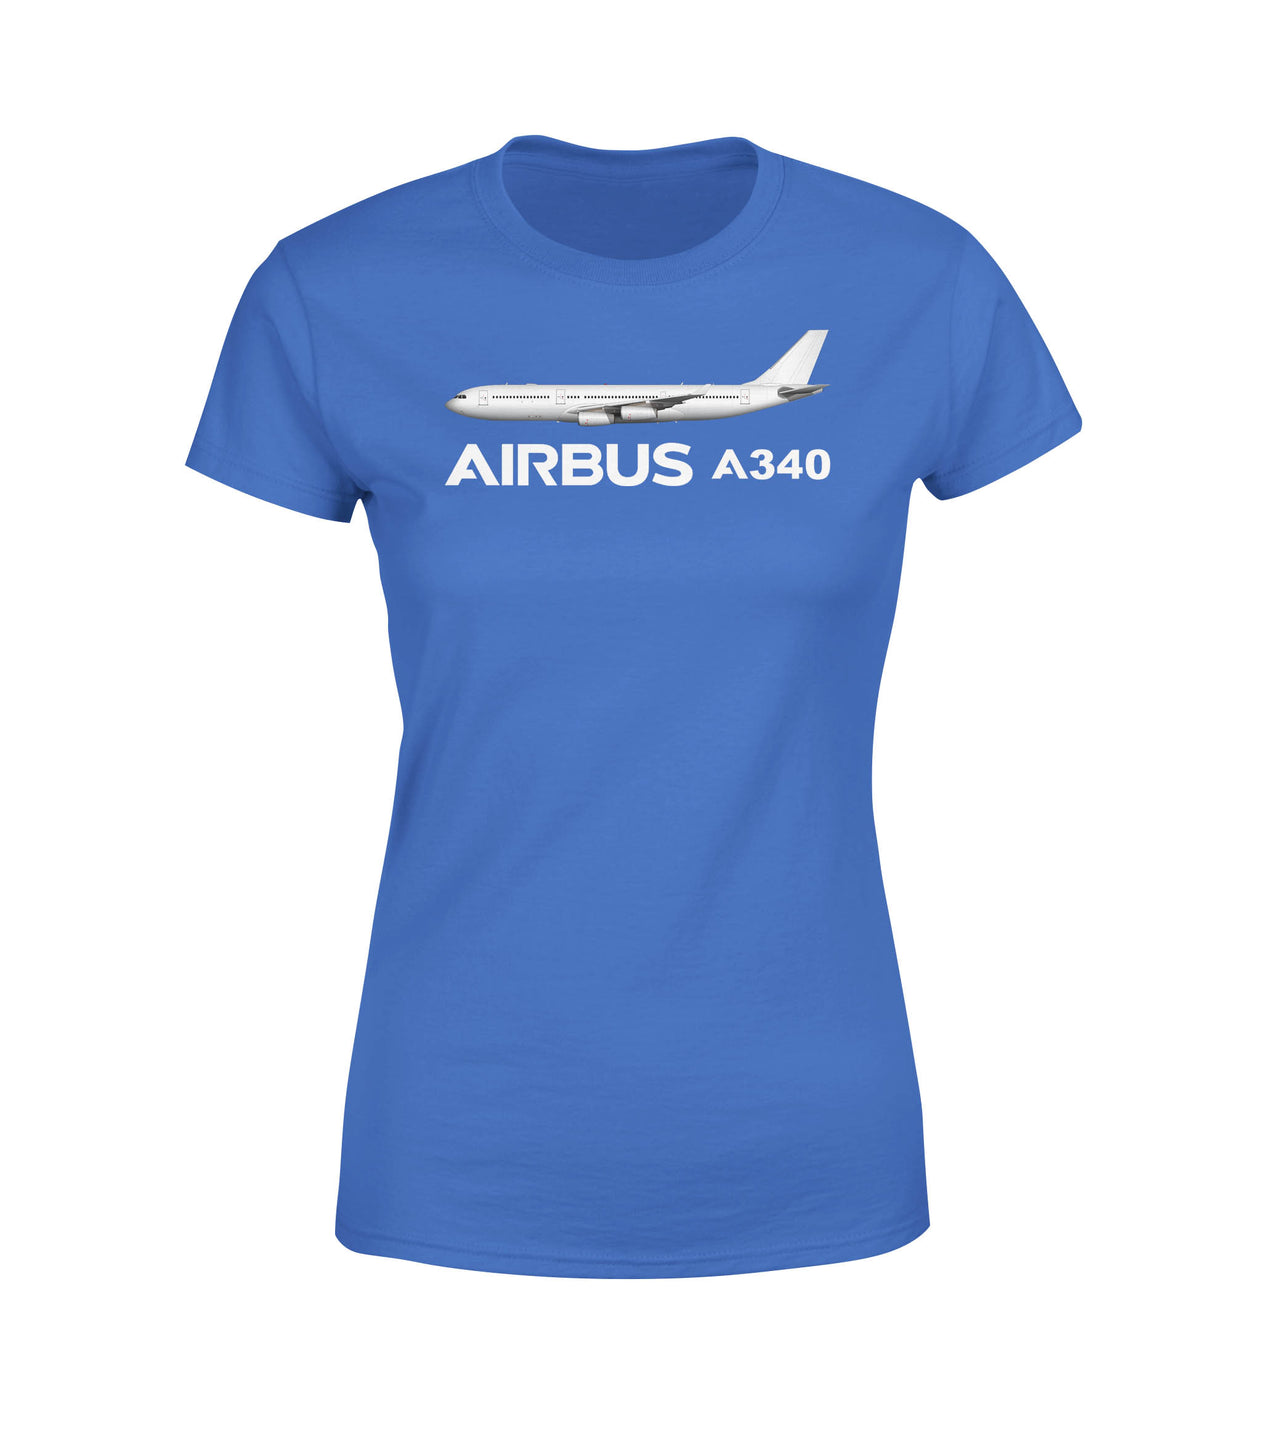 The Airbus A340 Designed Women T-Shirts